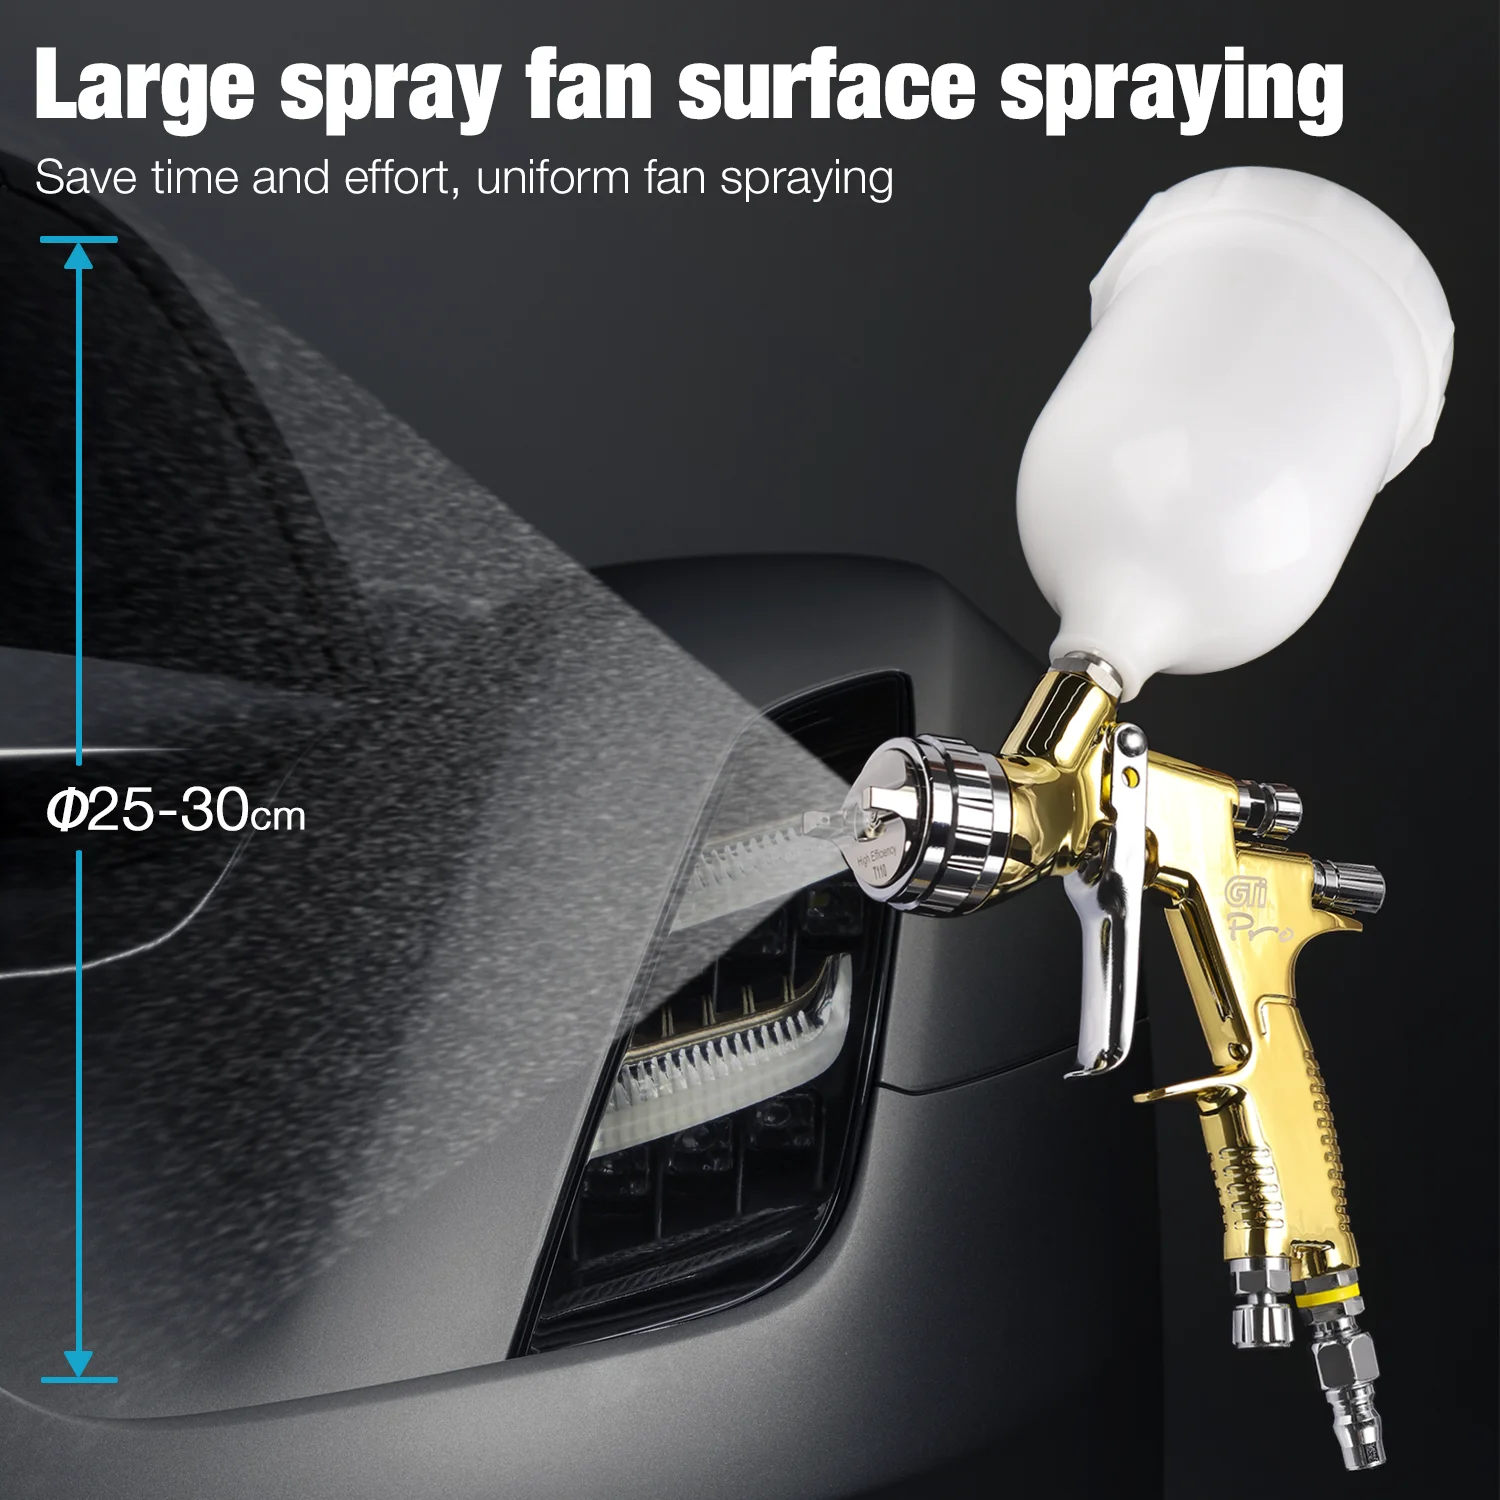 New High Quality Spray  GTI Pro 1.m Nozzle Painting  High Atomization Paint  Wat - £149.69 GBP